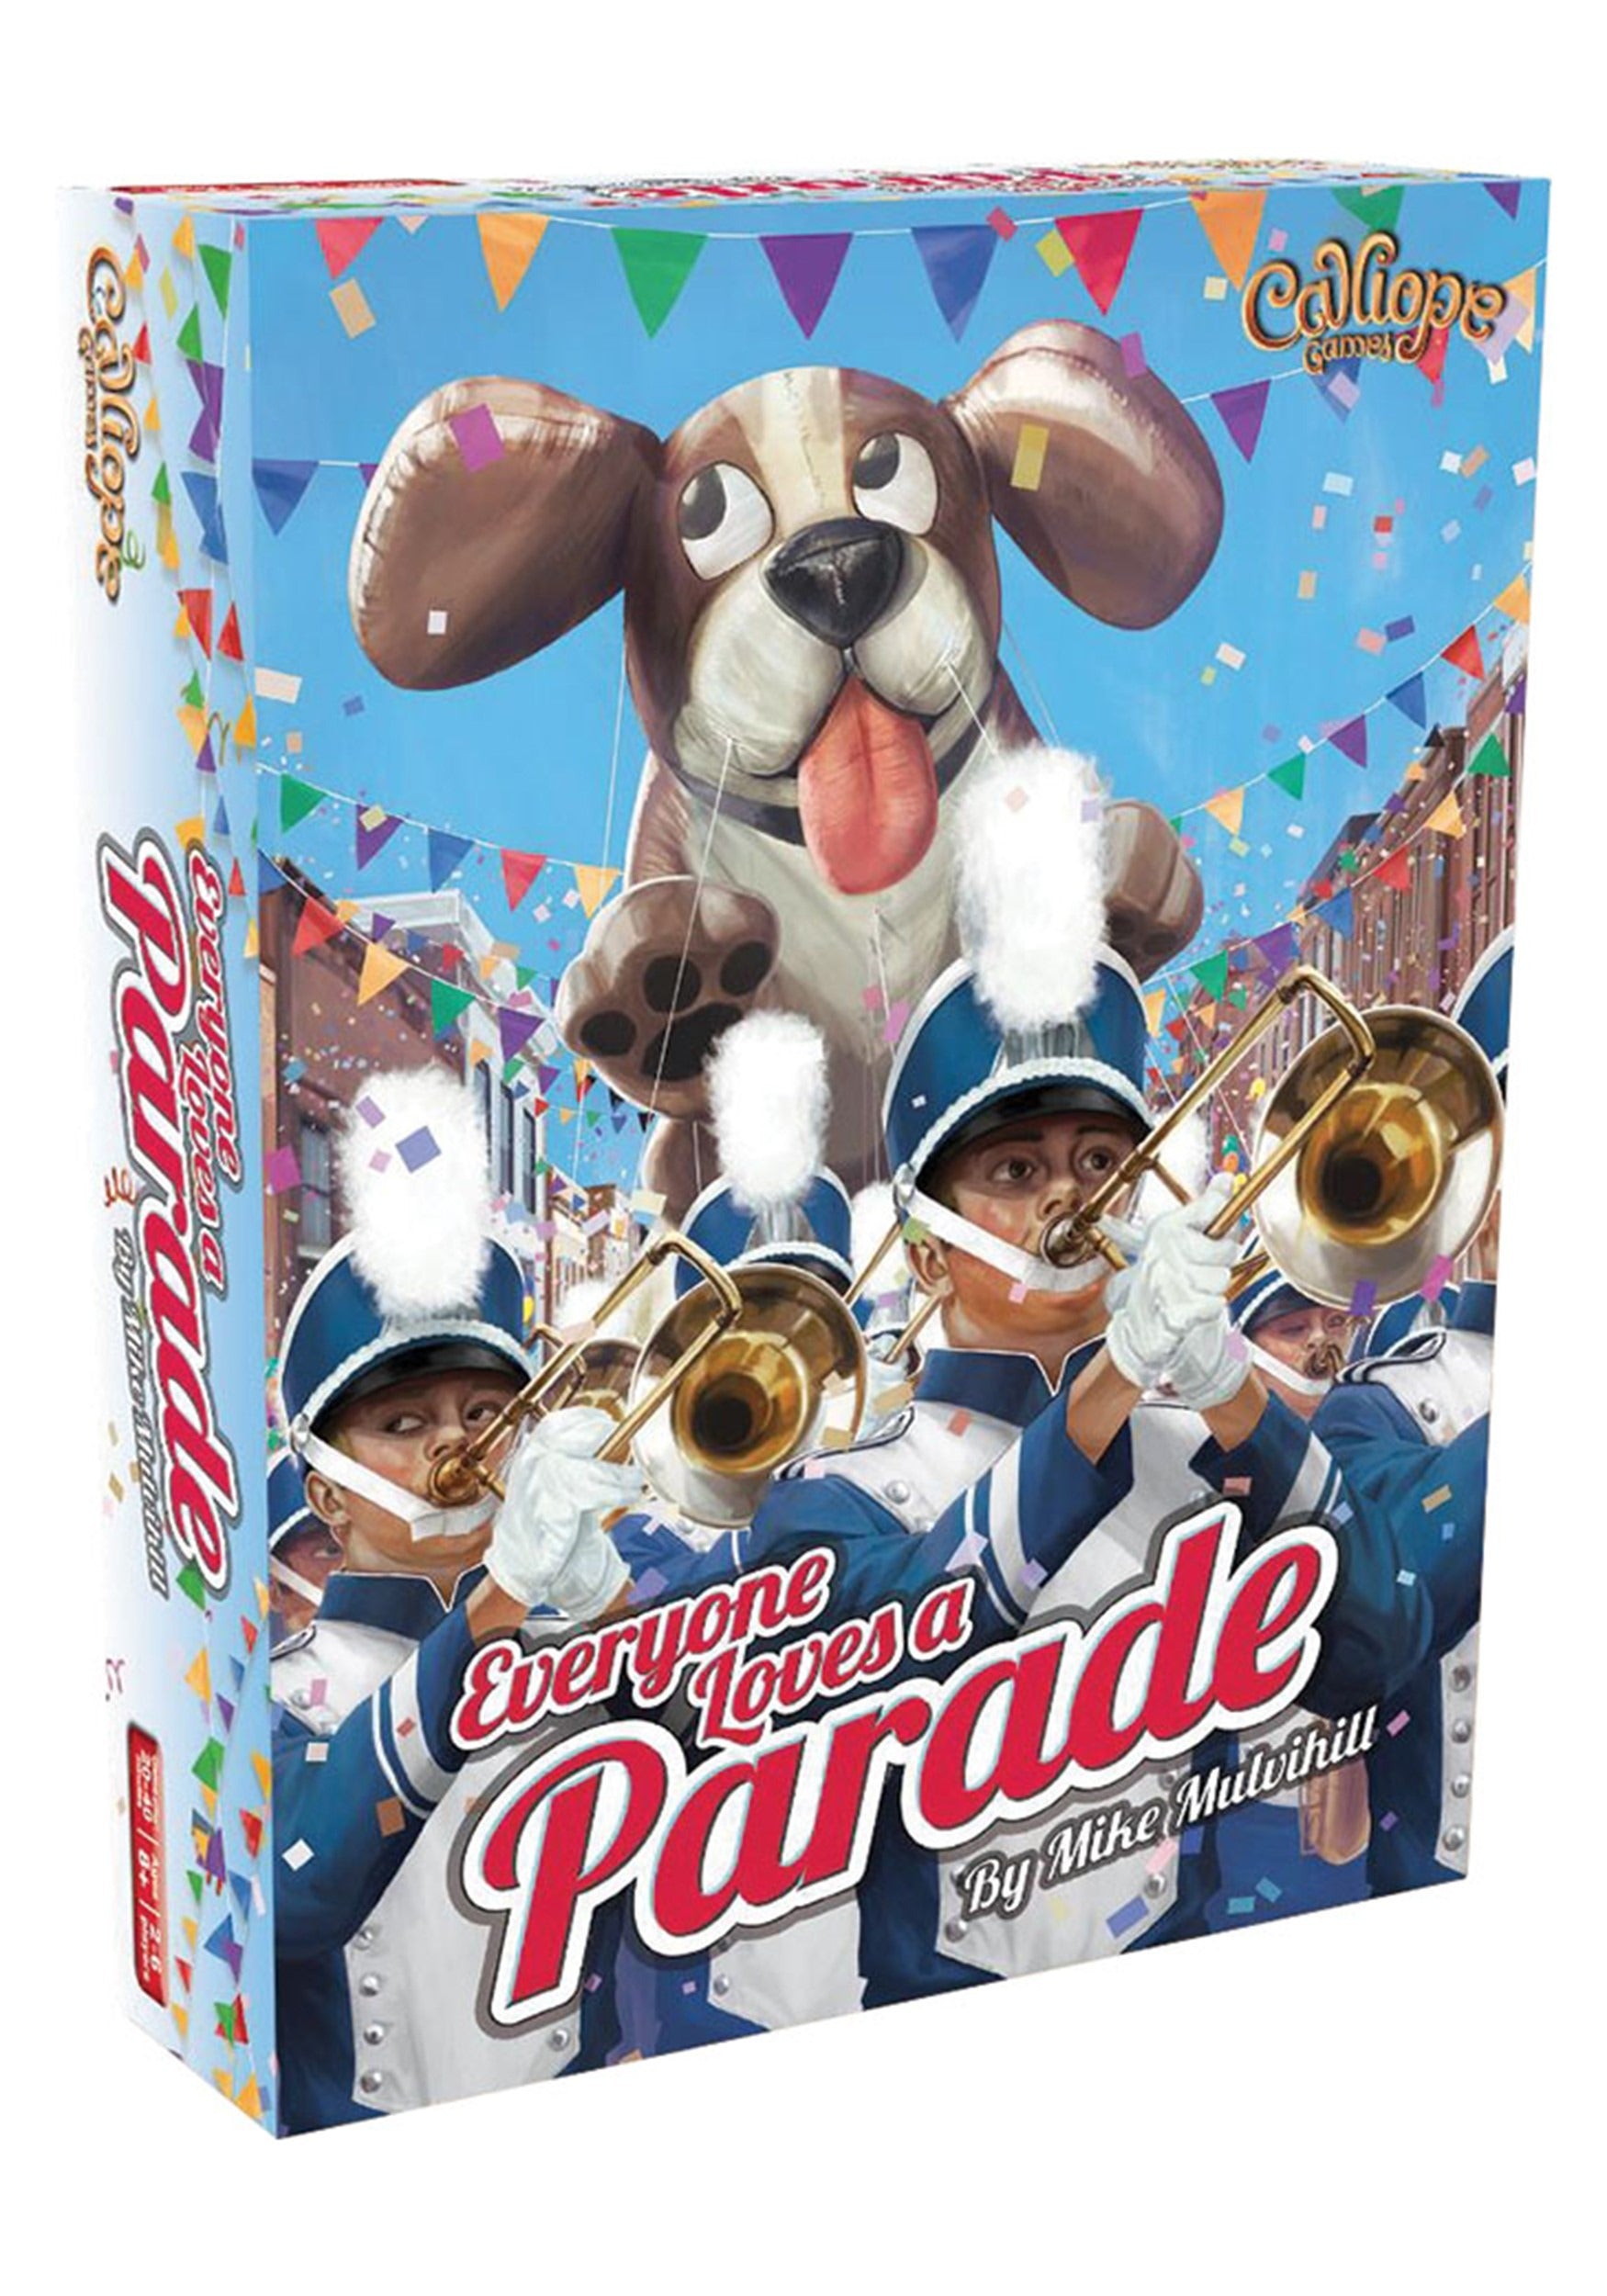 Everyone Loves A Parade preview image